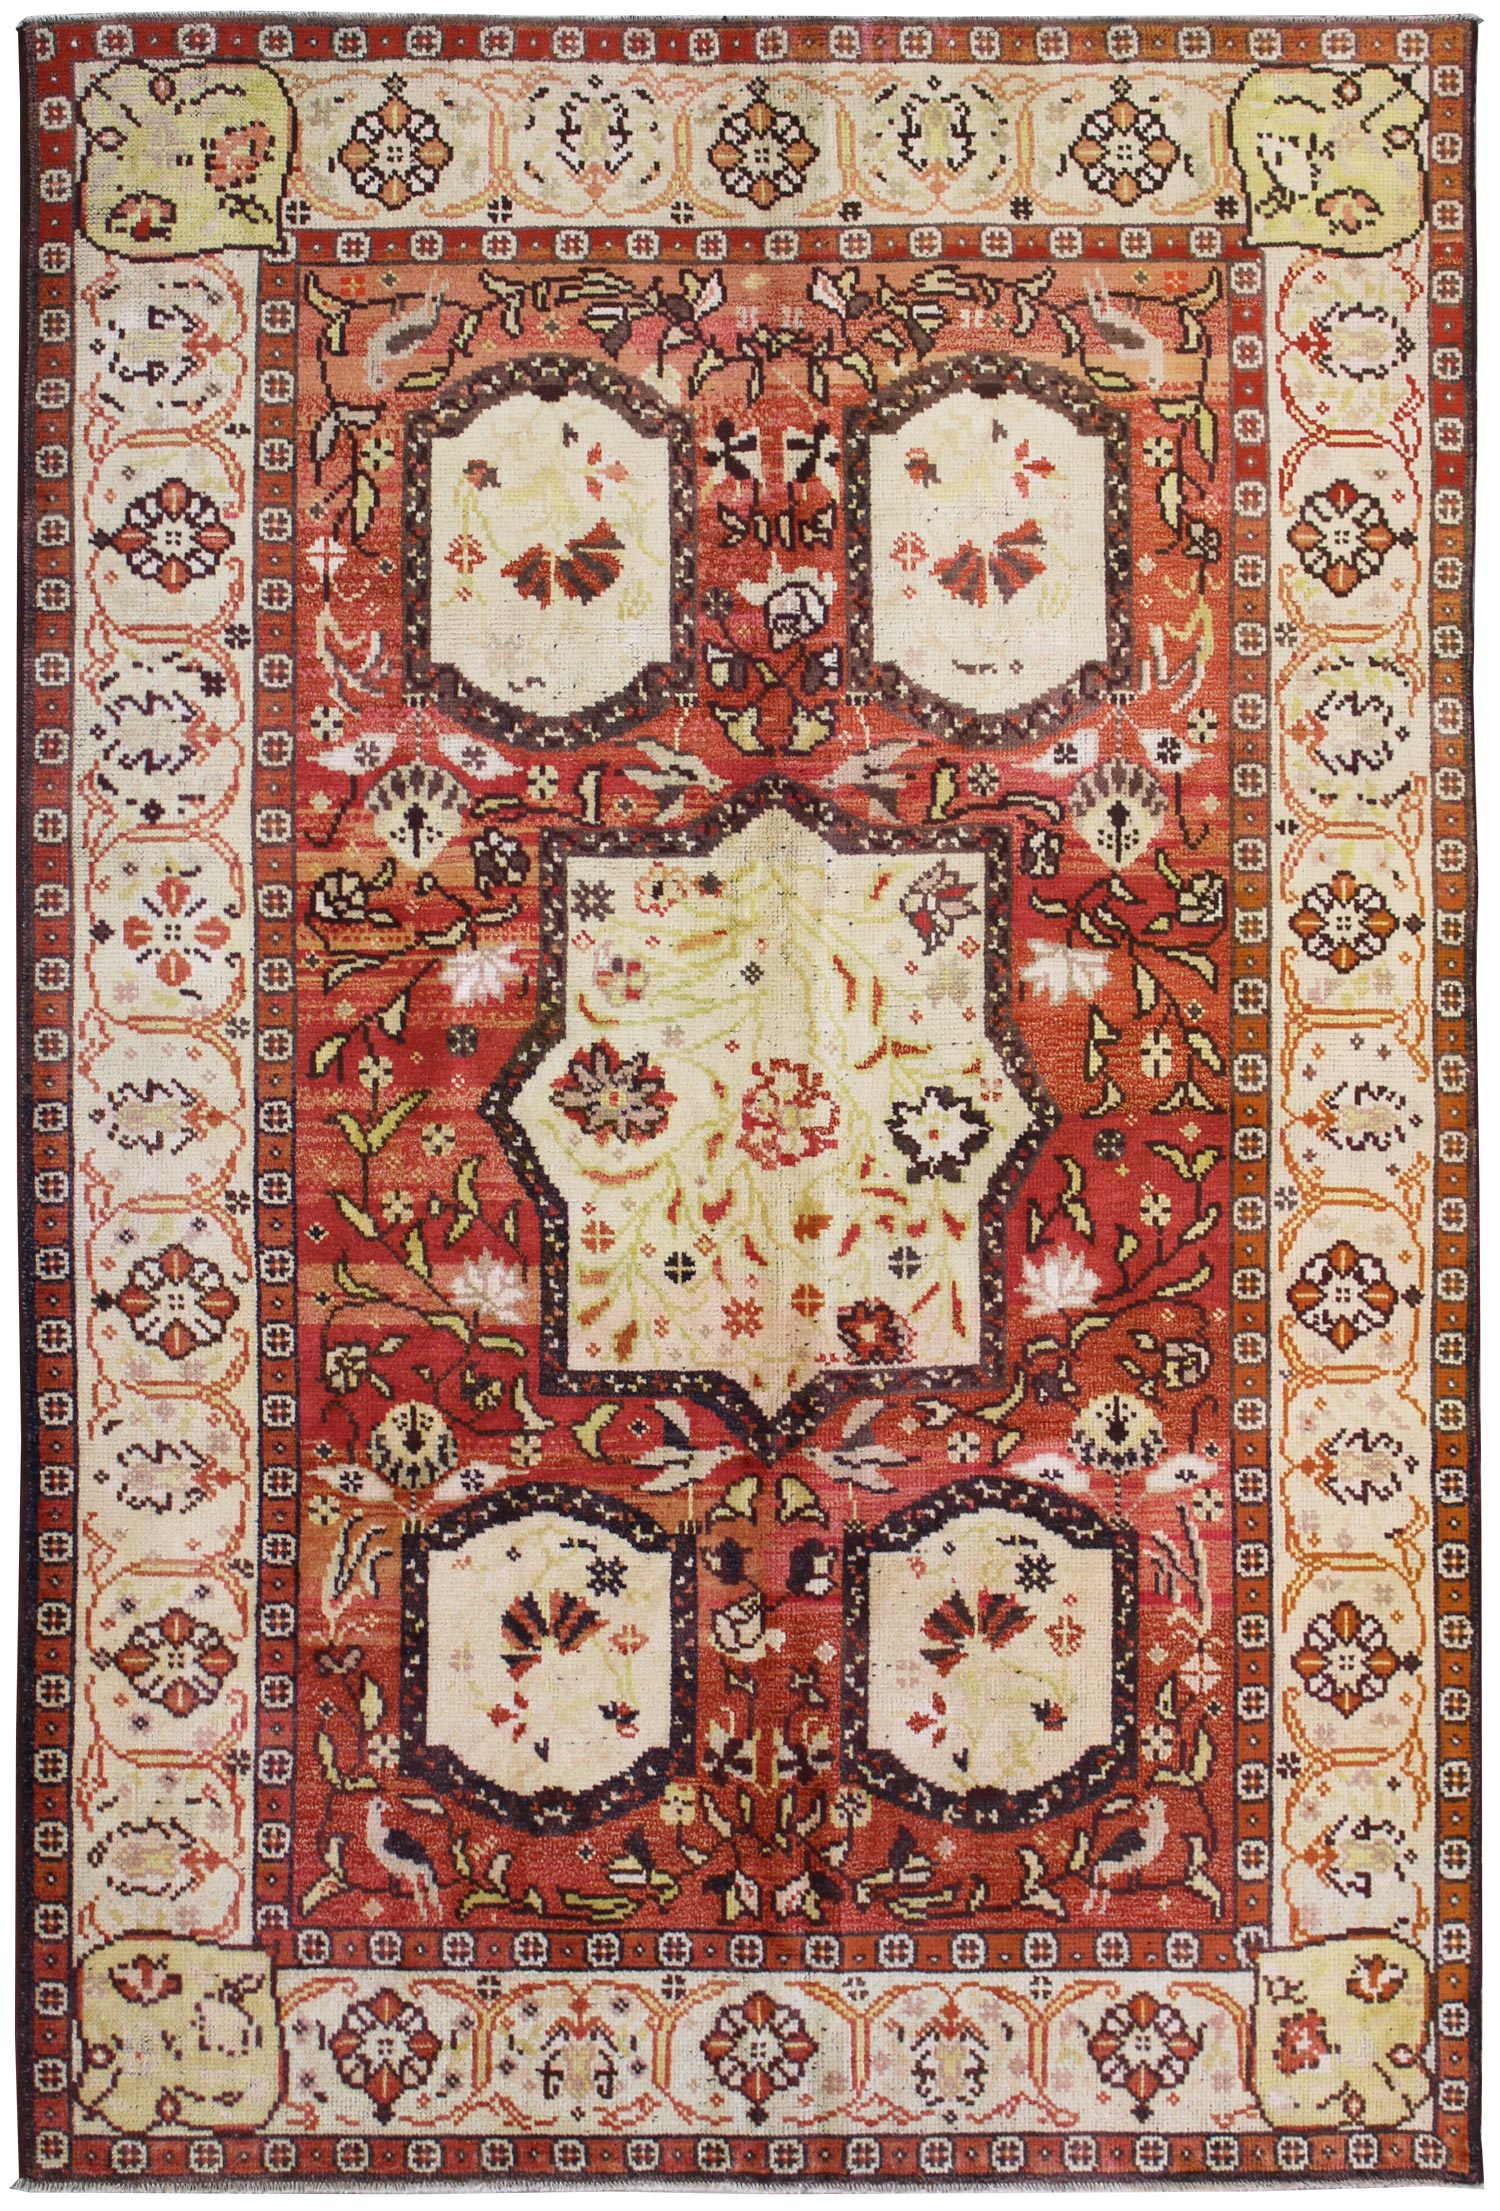 Antique Arts & Crafts Handwoven Traditional Rug